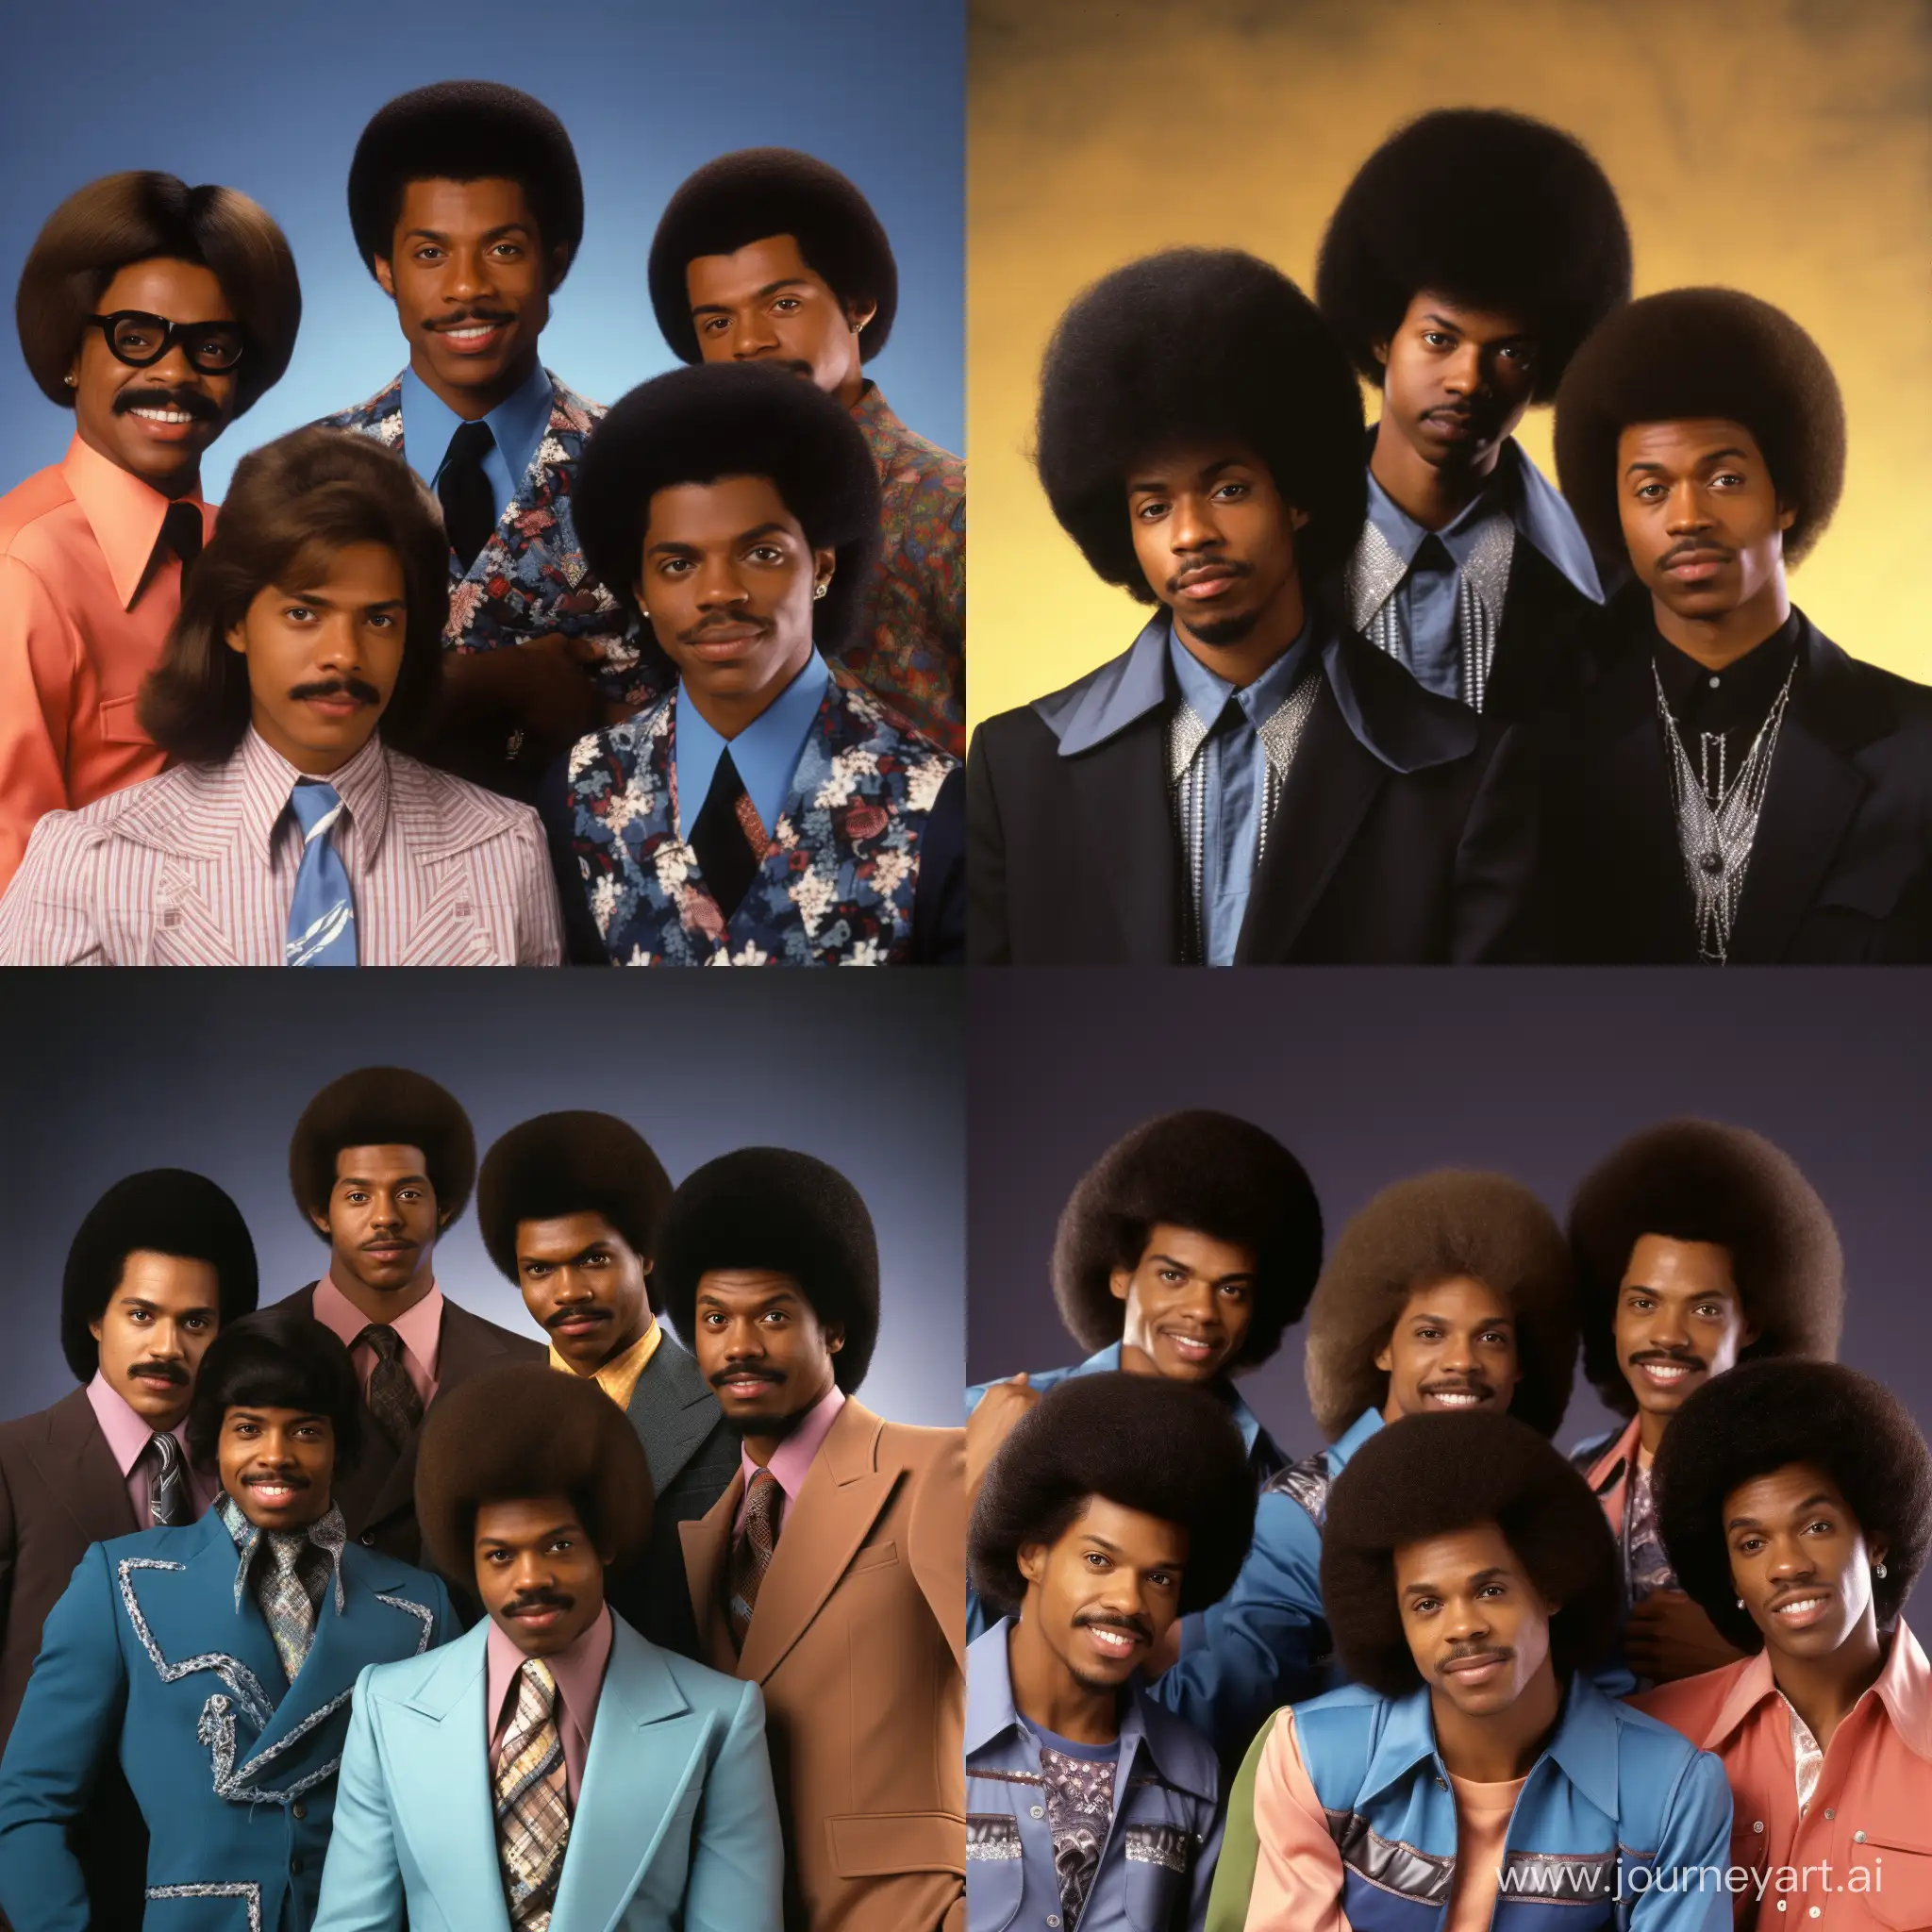 Soulful-Harmony-RB-Group-of-Men-with-Kinky-Conk-Hairstyles-in-1979